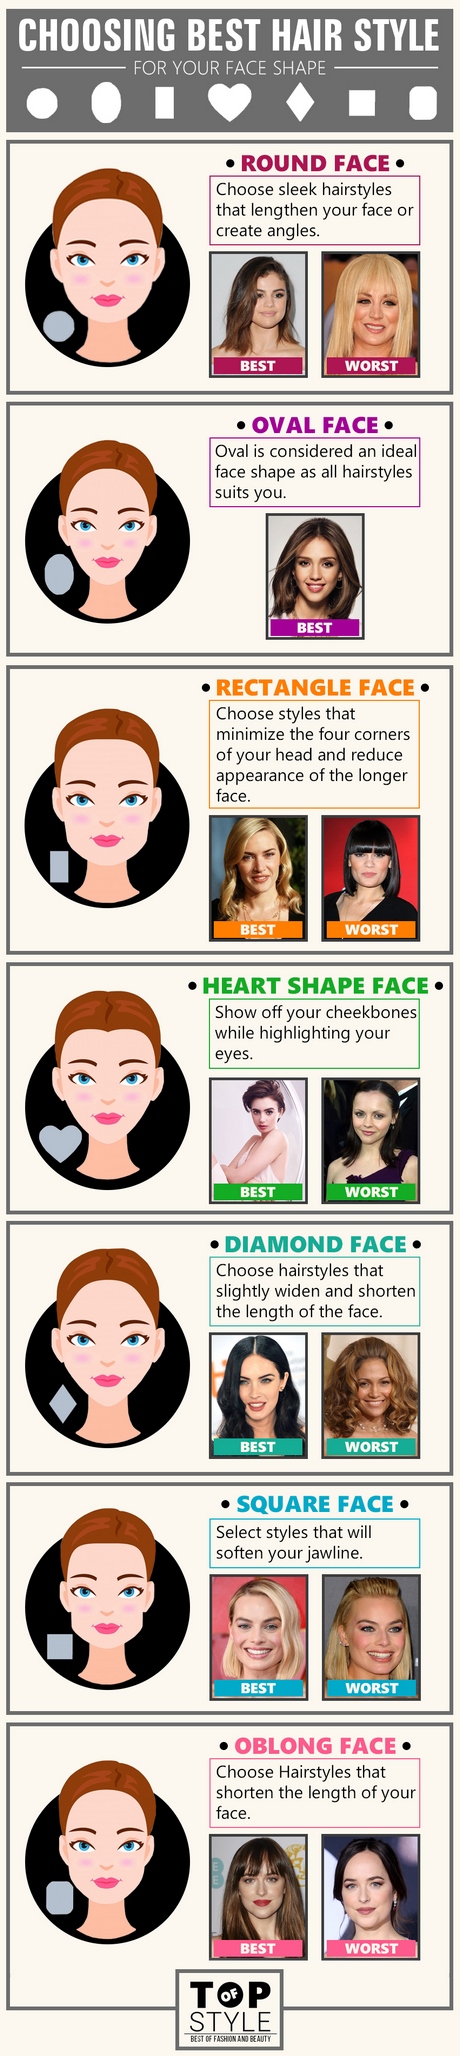 Round shaped face hairstyles female round-shaped-face-hairstyles-female-09_15